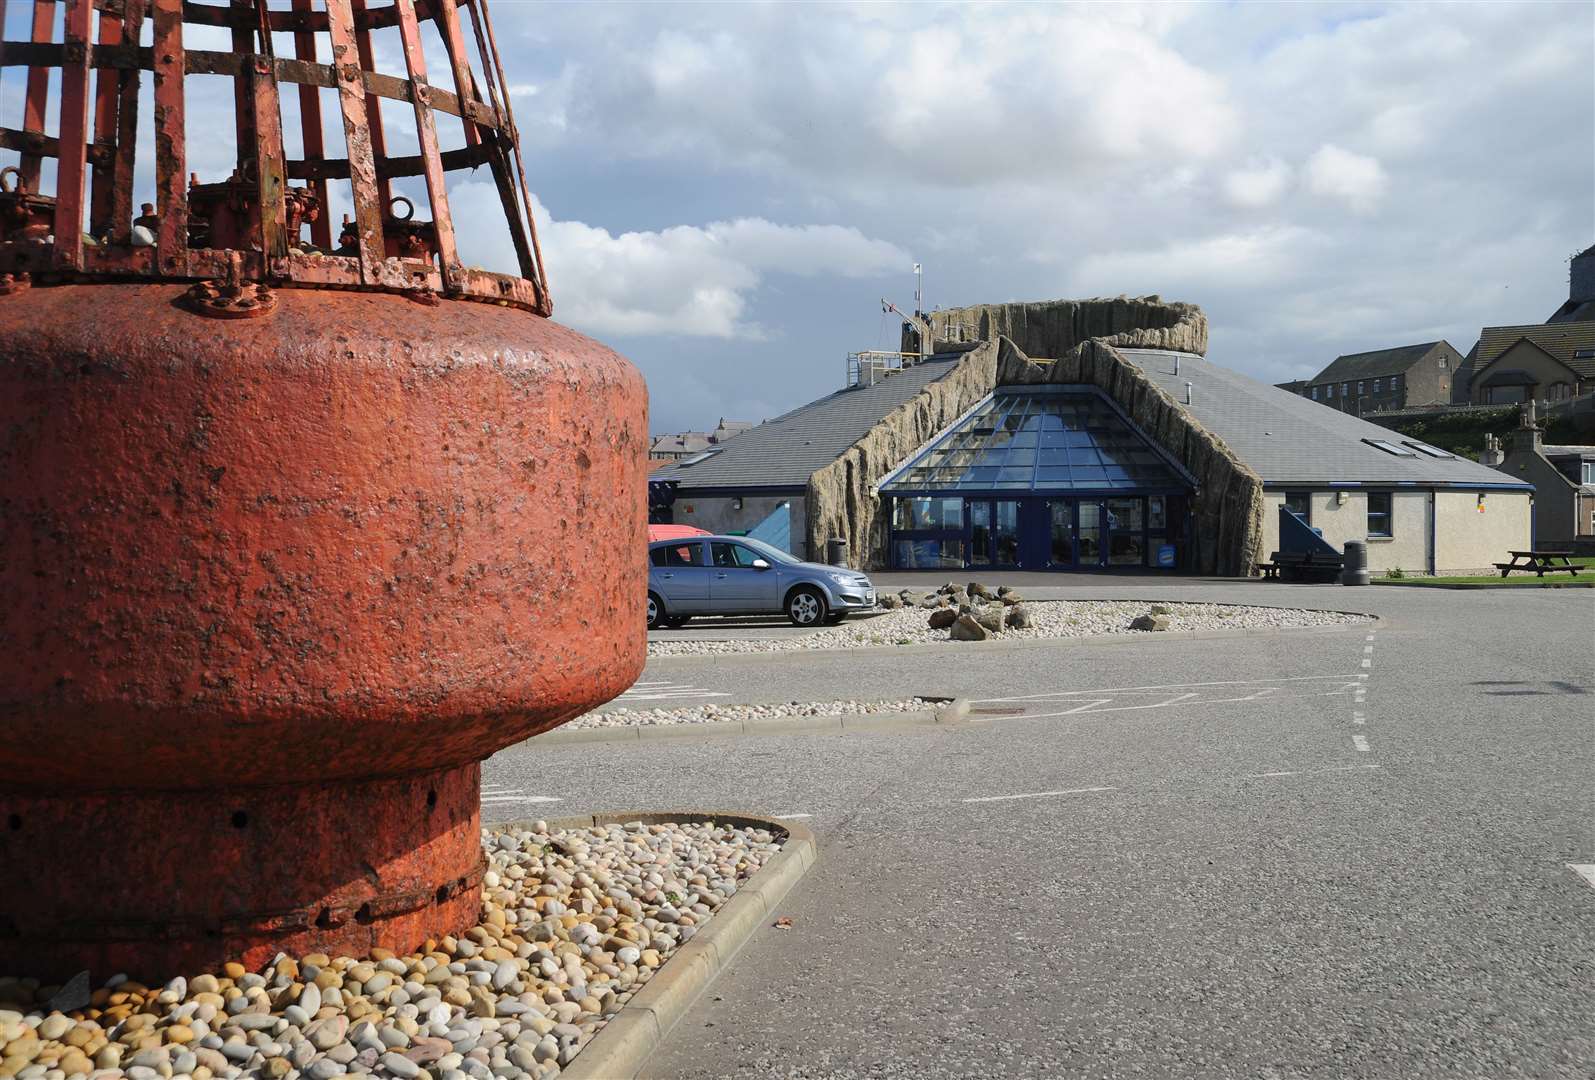 Macduff Marine Aquarium has been recognised as a site of interest for the international conference.